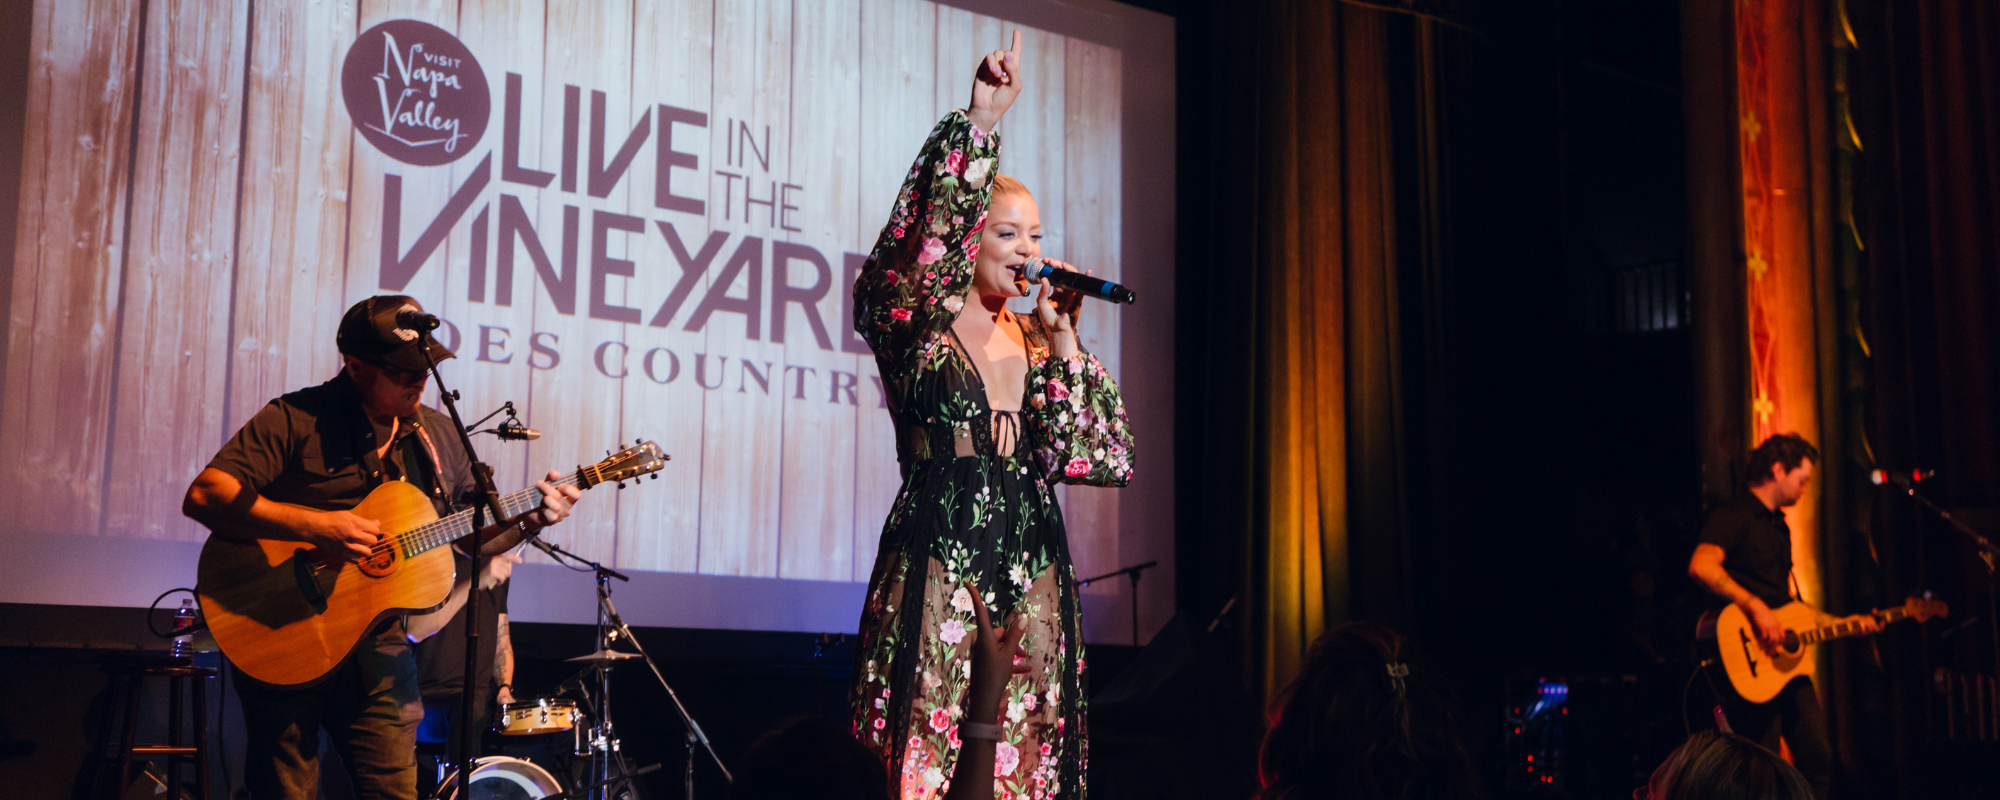 Lauren Alaina, Brandy Clark and Jimmie Allen Debut New Music at Live In The Vineyard Goes Country